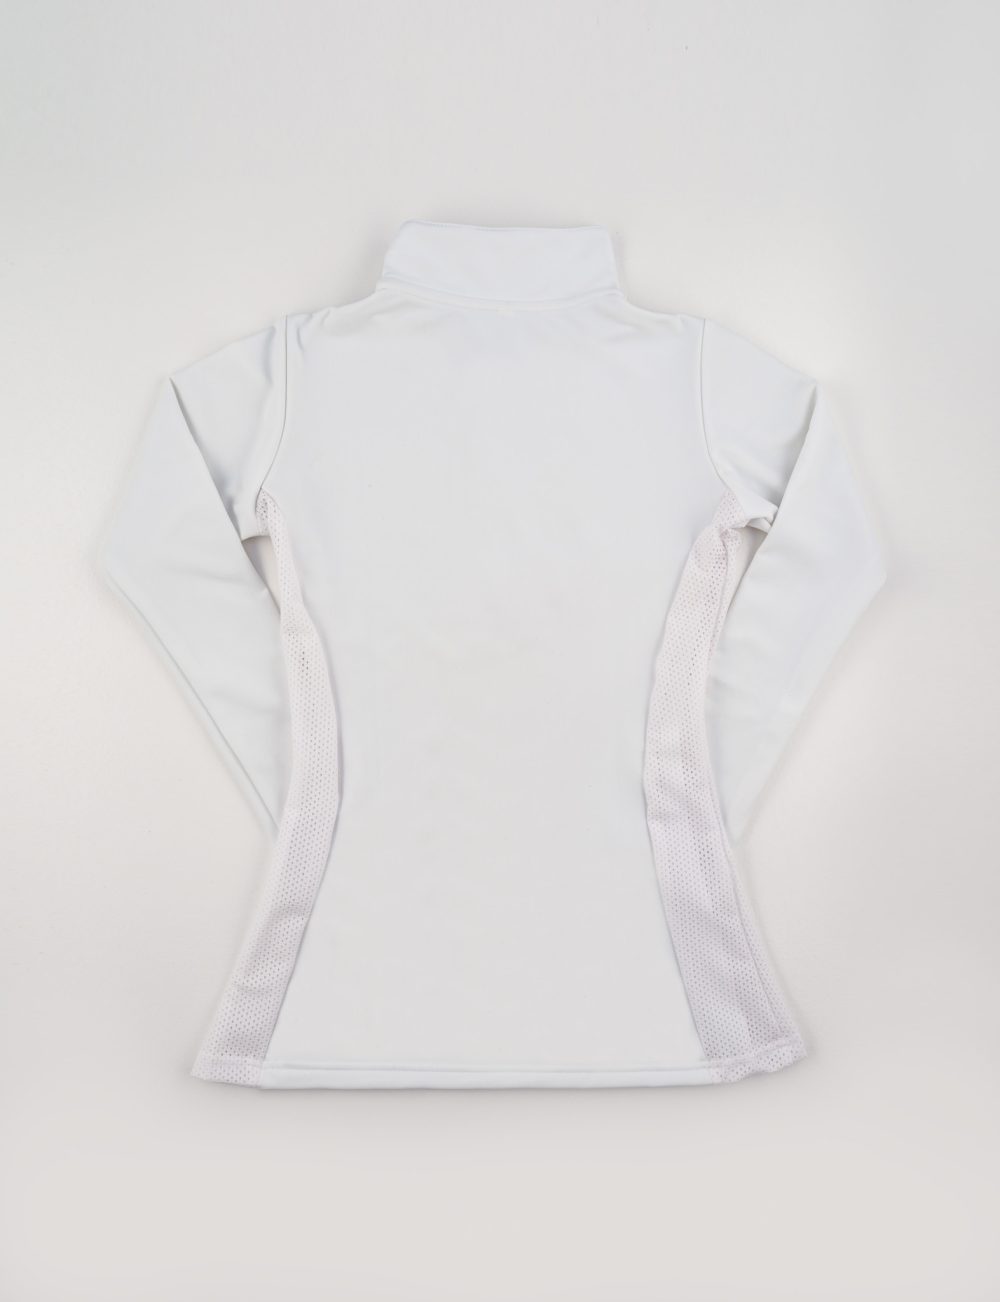 American Equus Technical Rider Wear - Base Layer Top White